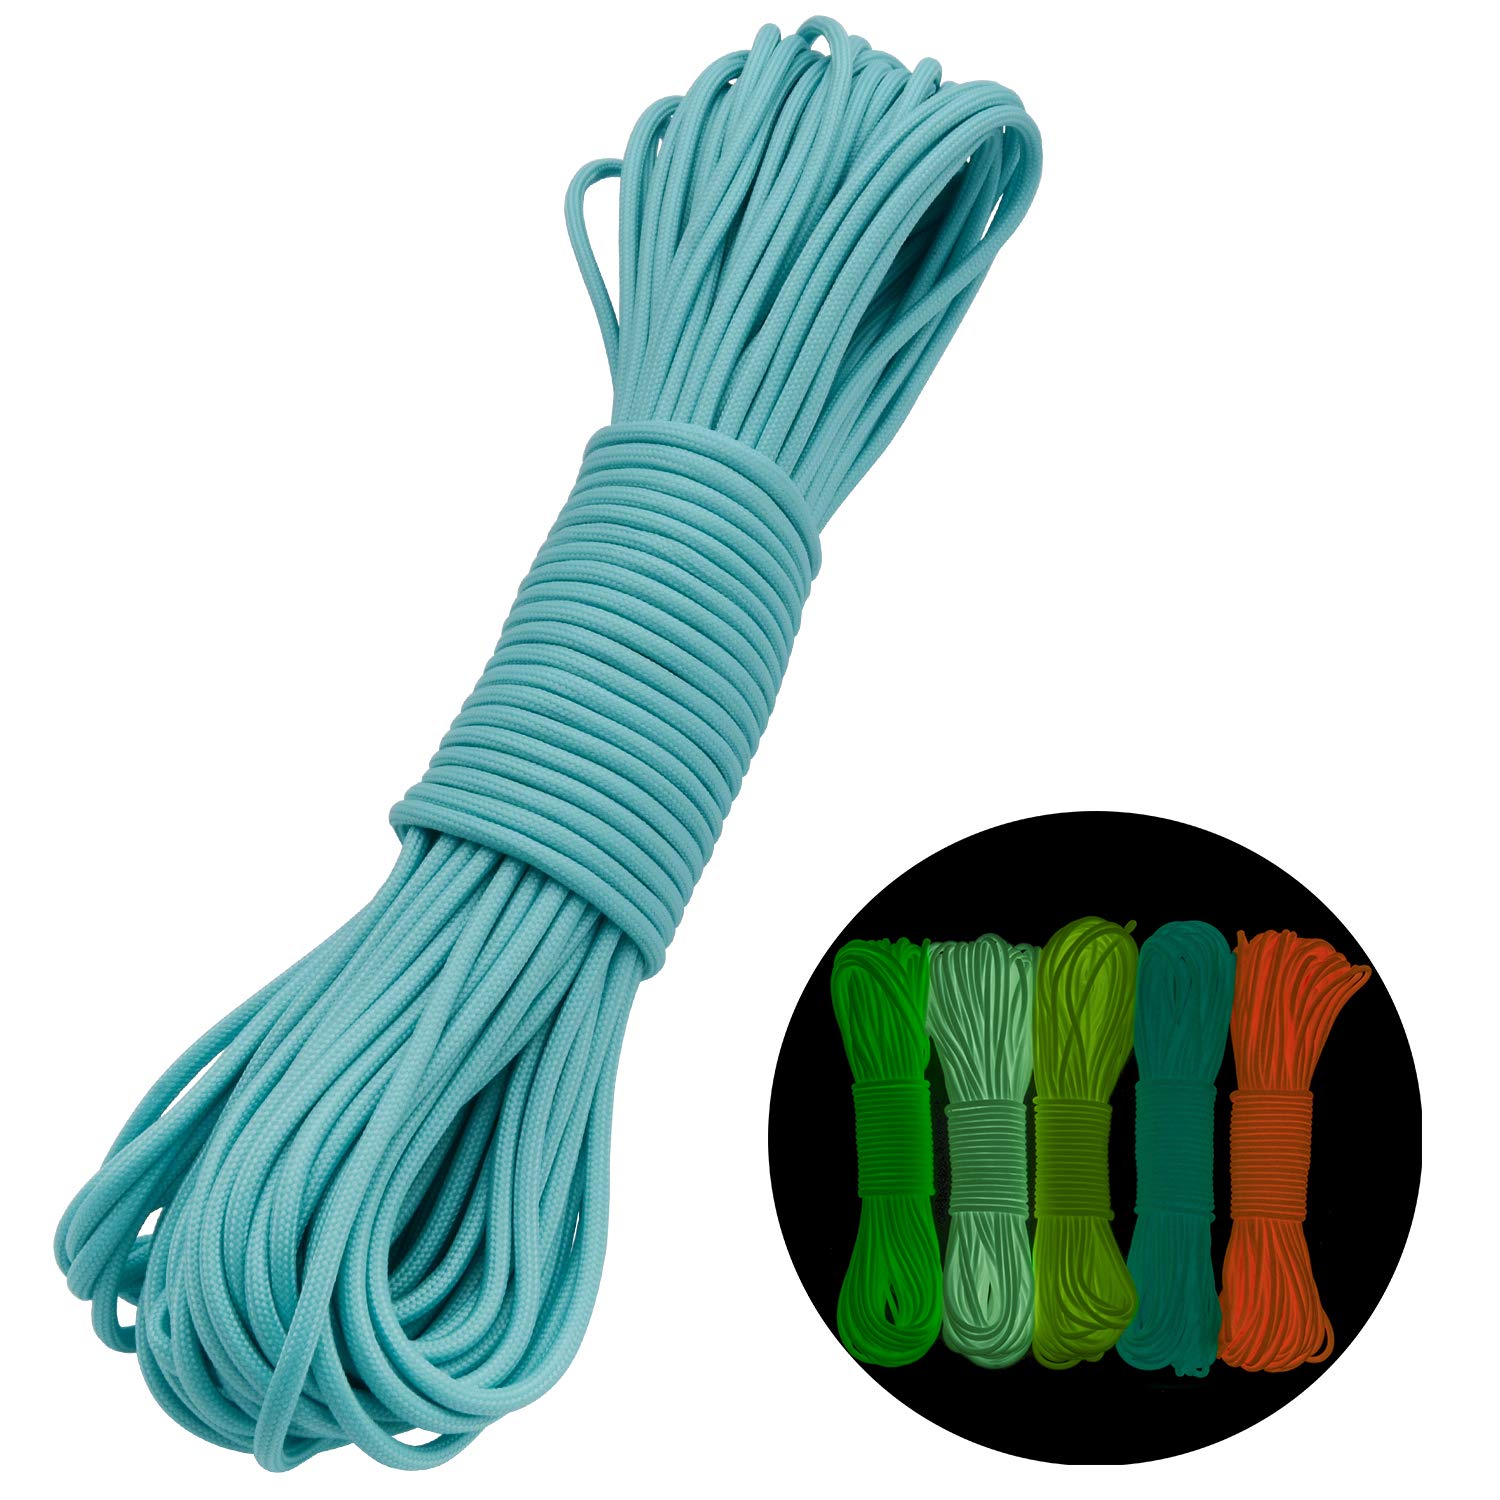 West Coast Paracord Glow in The Dark | 7 Strand Type III 550 Paracord |  100% Nylon | 10, 25, 50, 100ft Lengths | 8 Colors